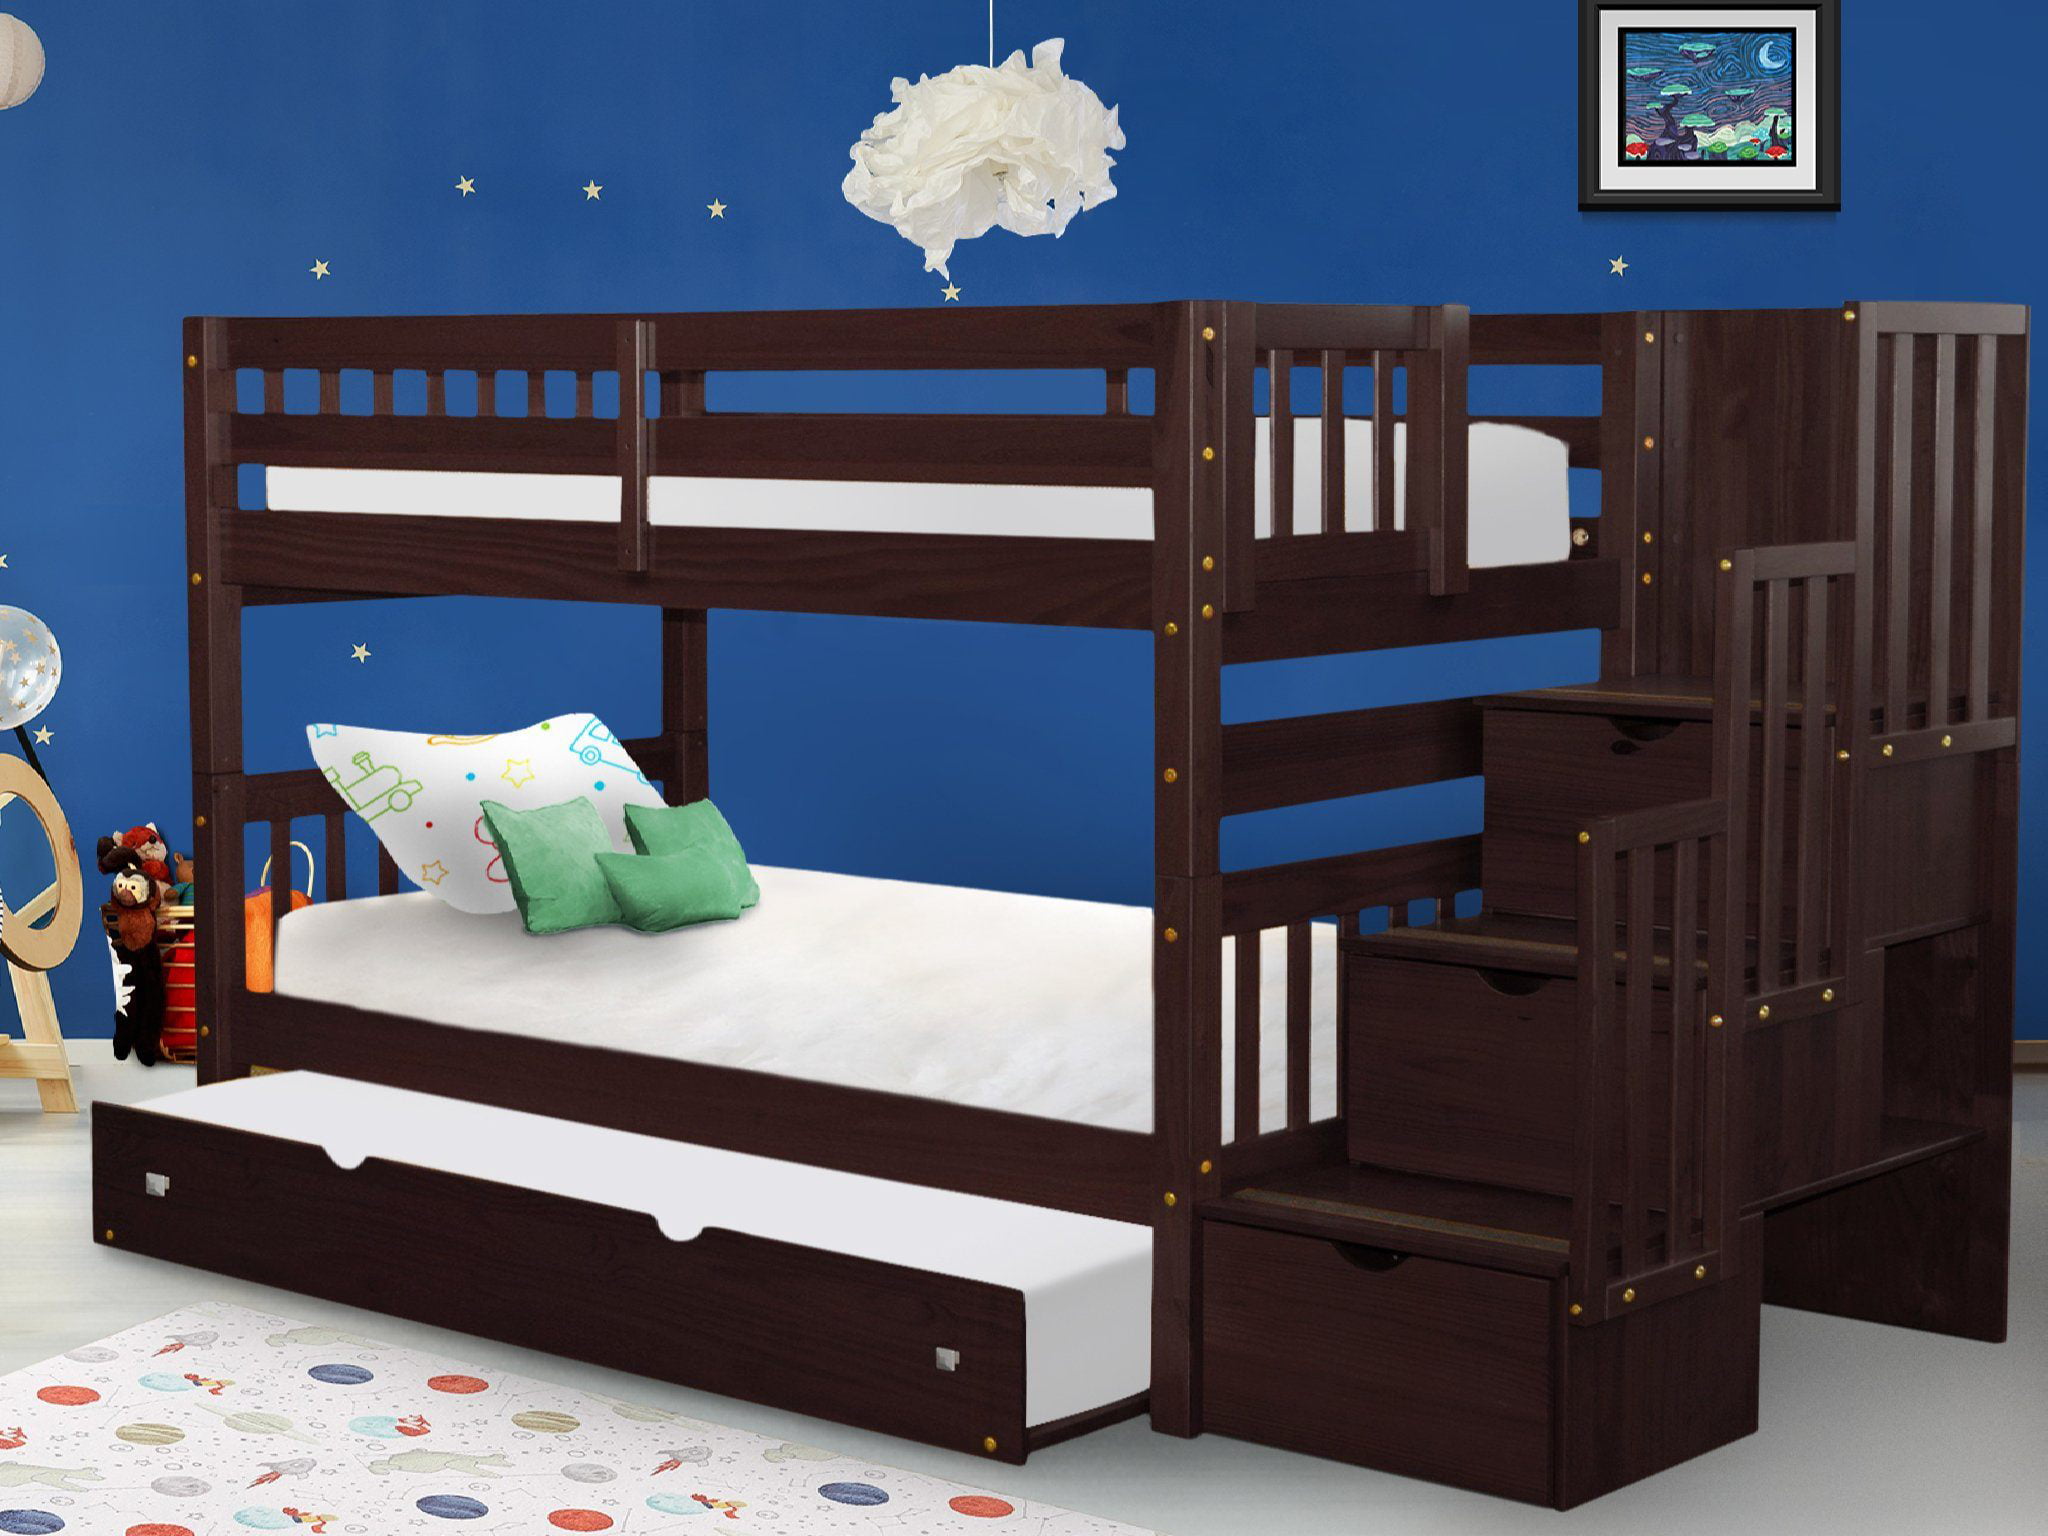 Bedz King Stairway Bunk Beds Twin Over, Twin Over King Bed